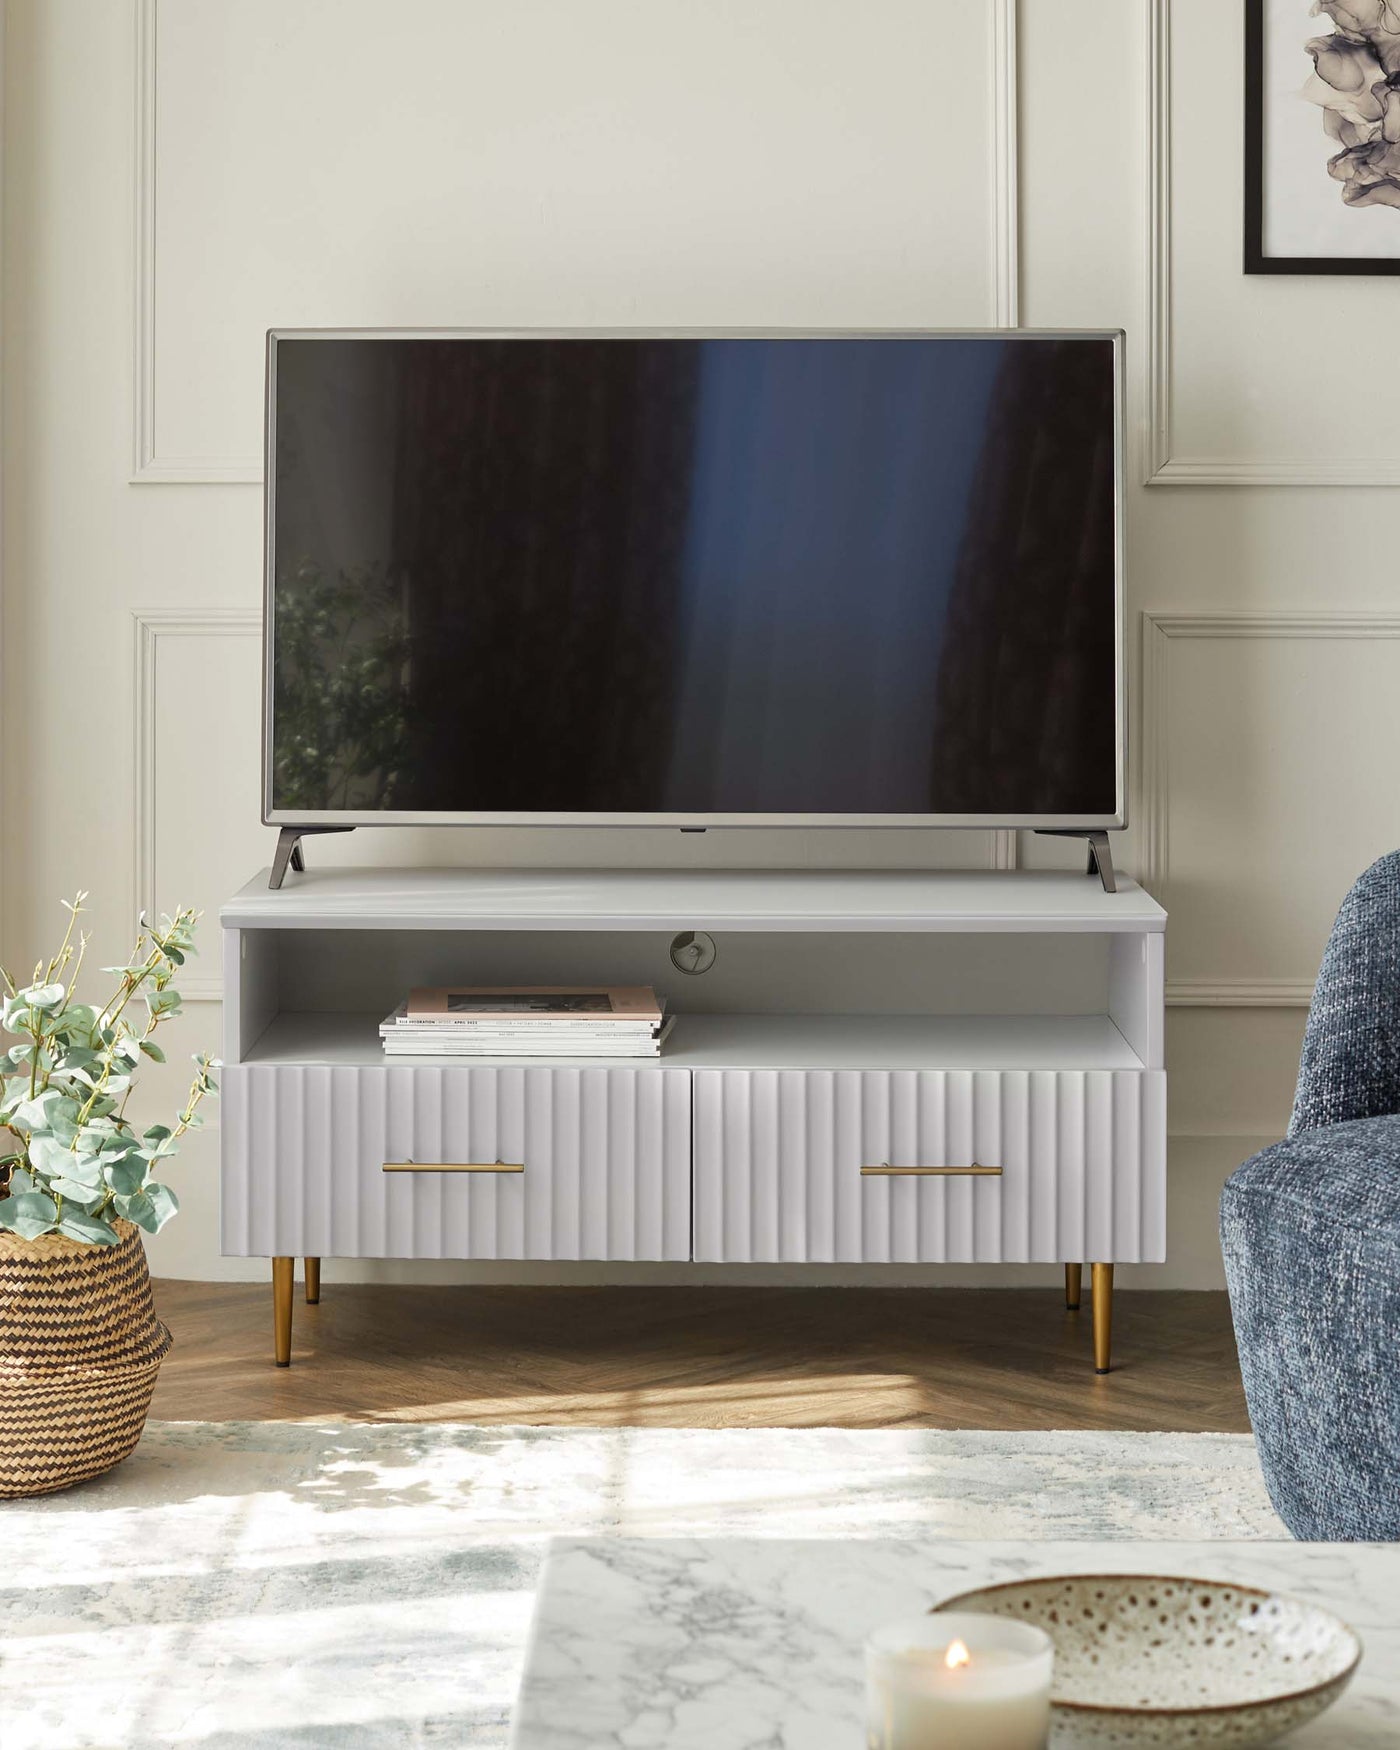 Modern light grey media console with textured front panels and gold-finished legs, supporting a flat-screen TV. Adjacent to the console is a wicker planter with greenery and a fragment of a blue upholstered chair visible to the right. A decorative marble-patterned rug is partially shown in the foreground.